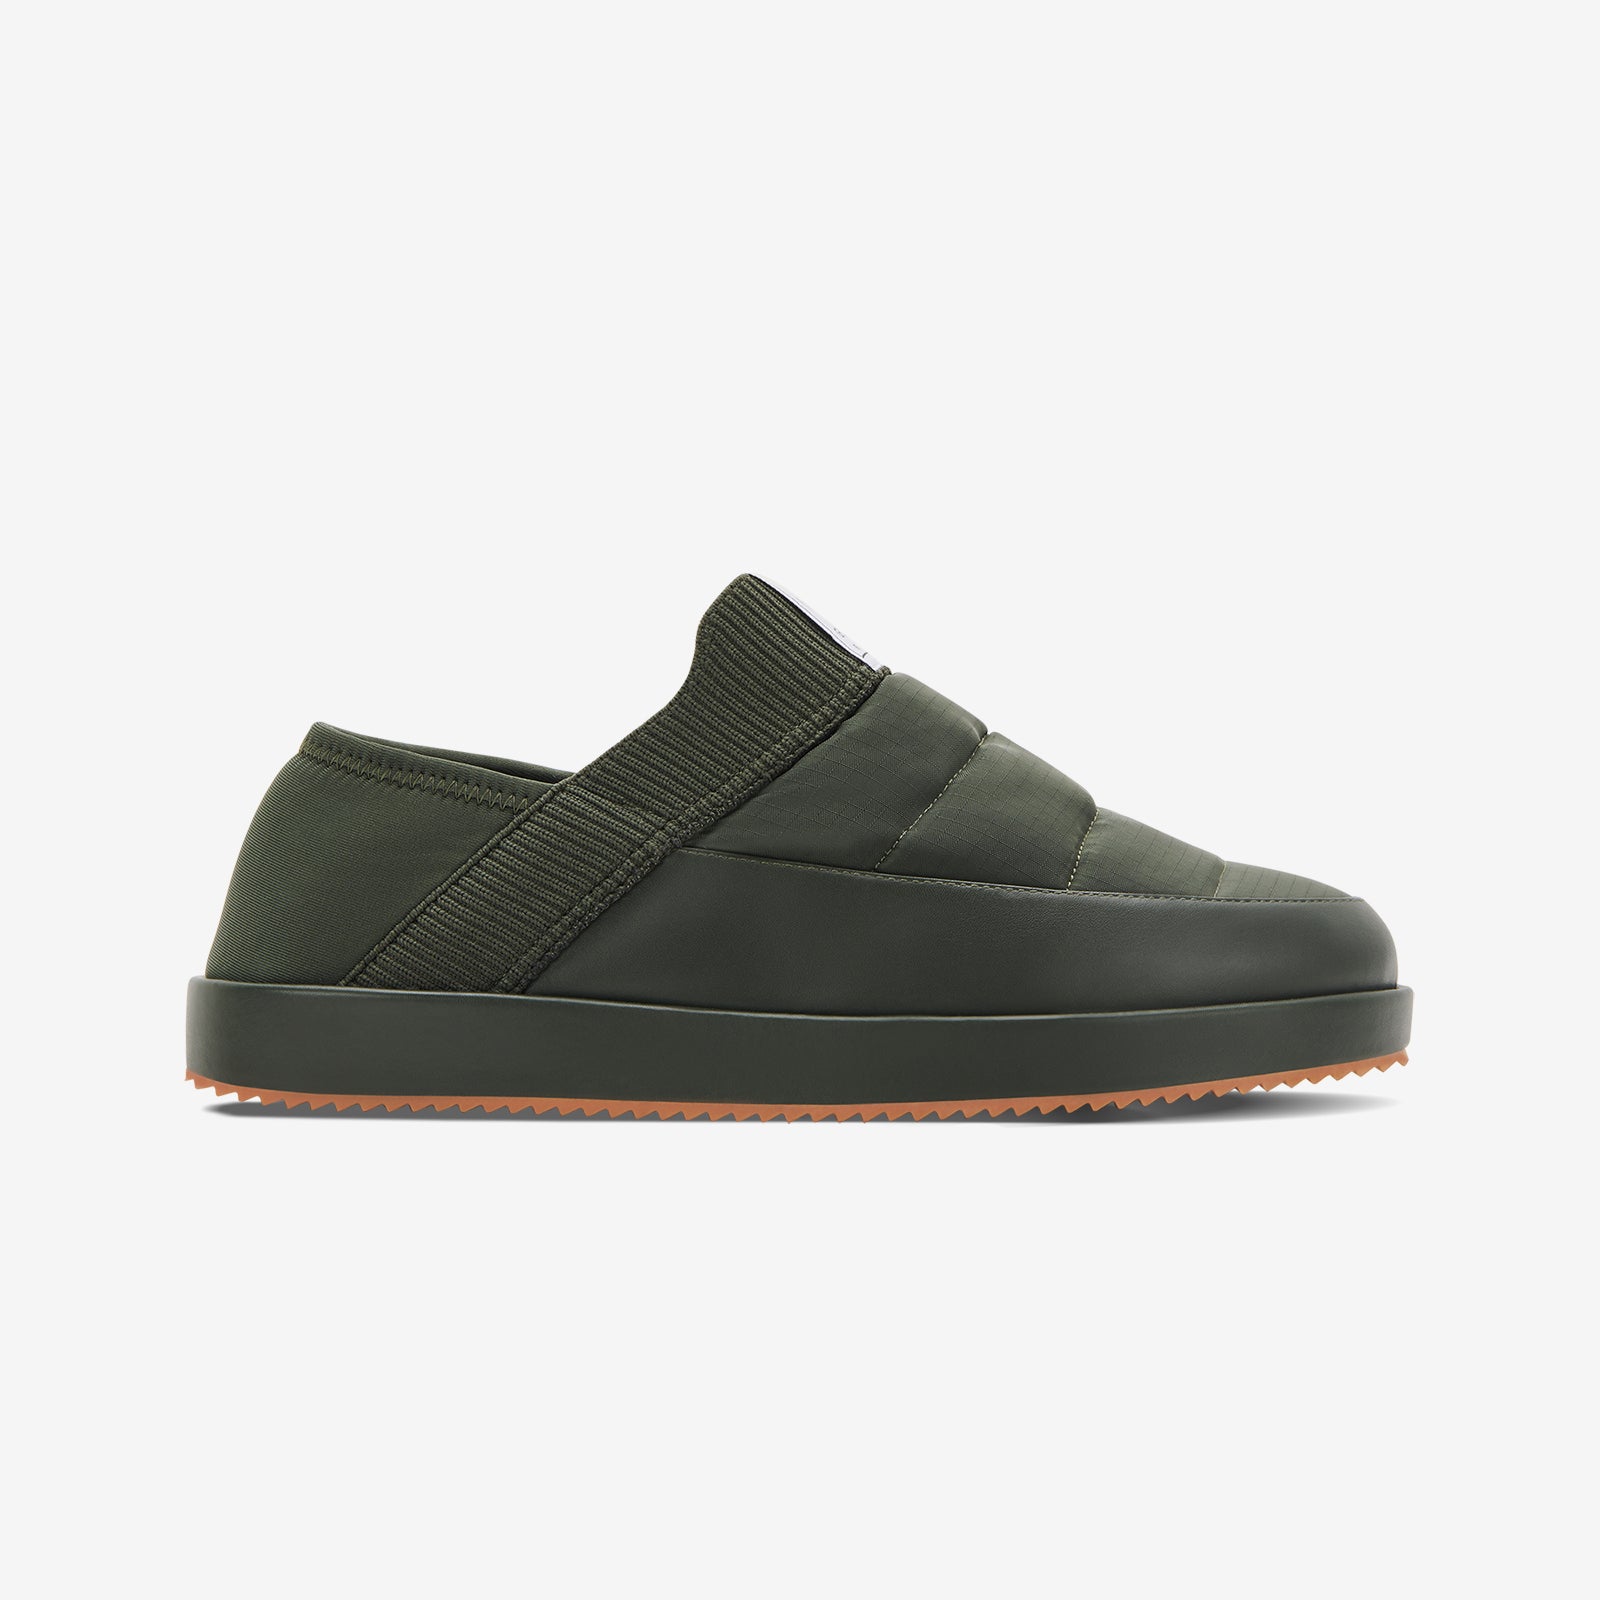 The Foster Closed Back Slipper  - Cargo